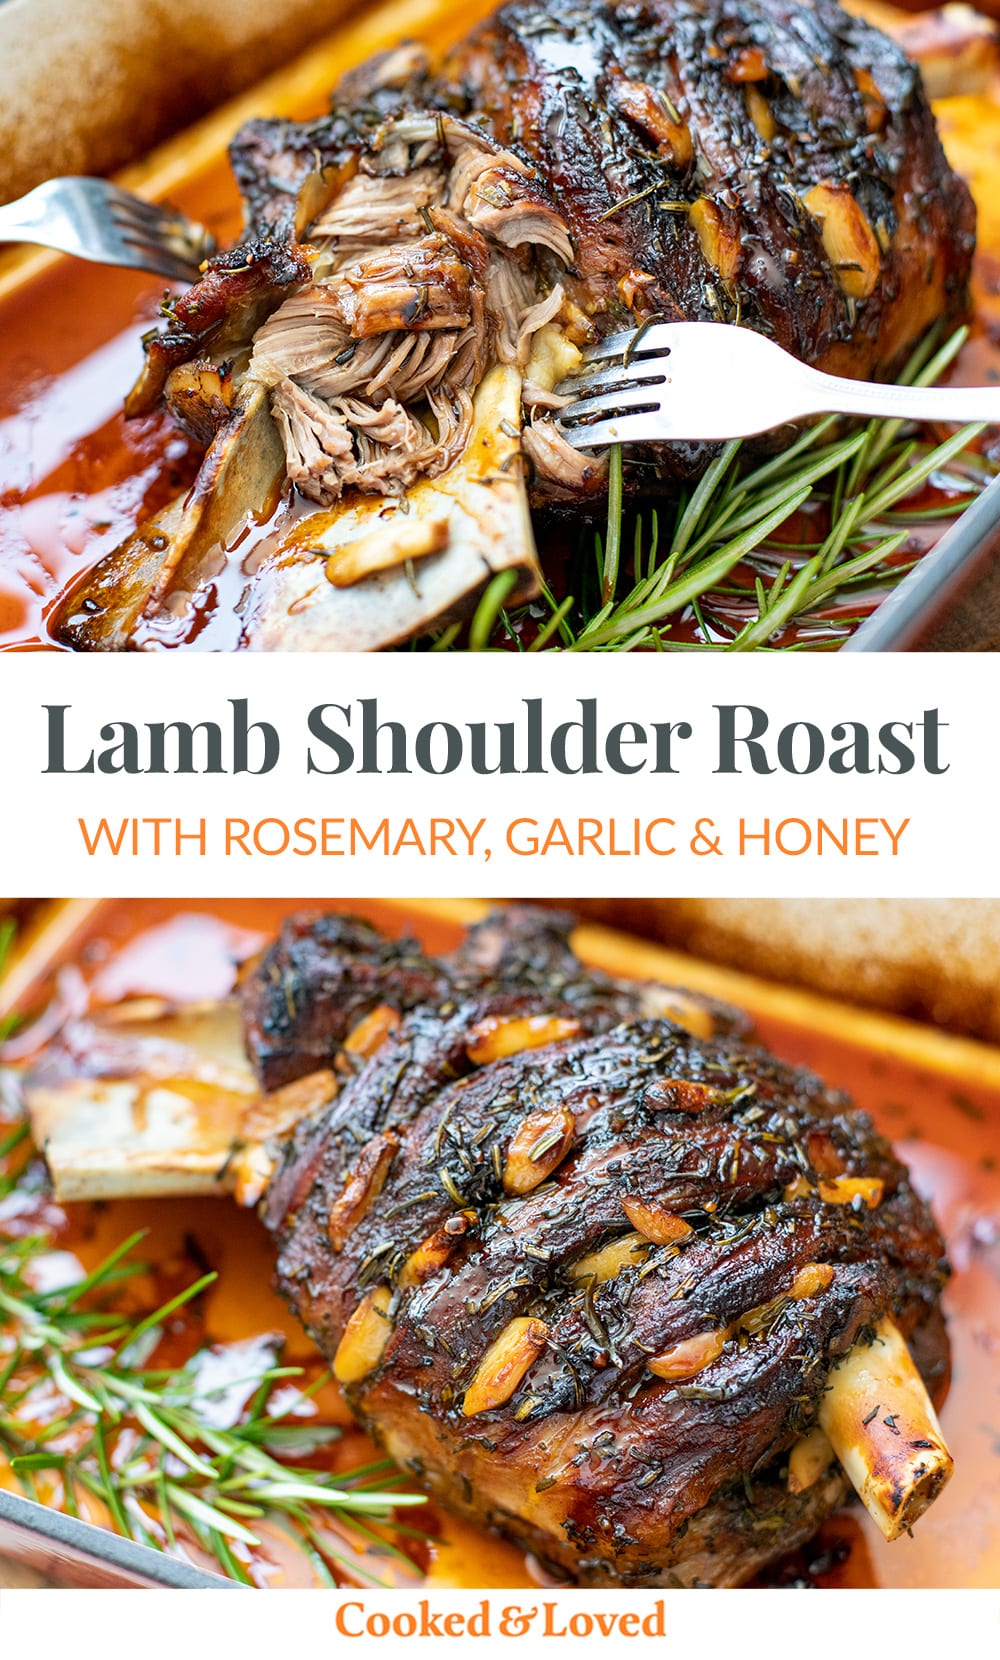 Slow-Cooked Lamb Shoulder With Rosemary, Garlic & Honey